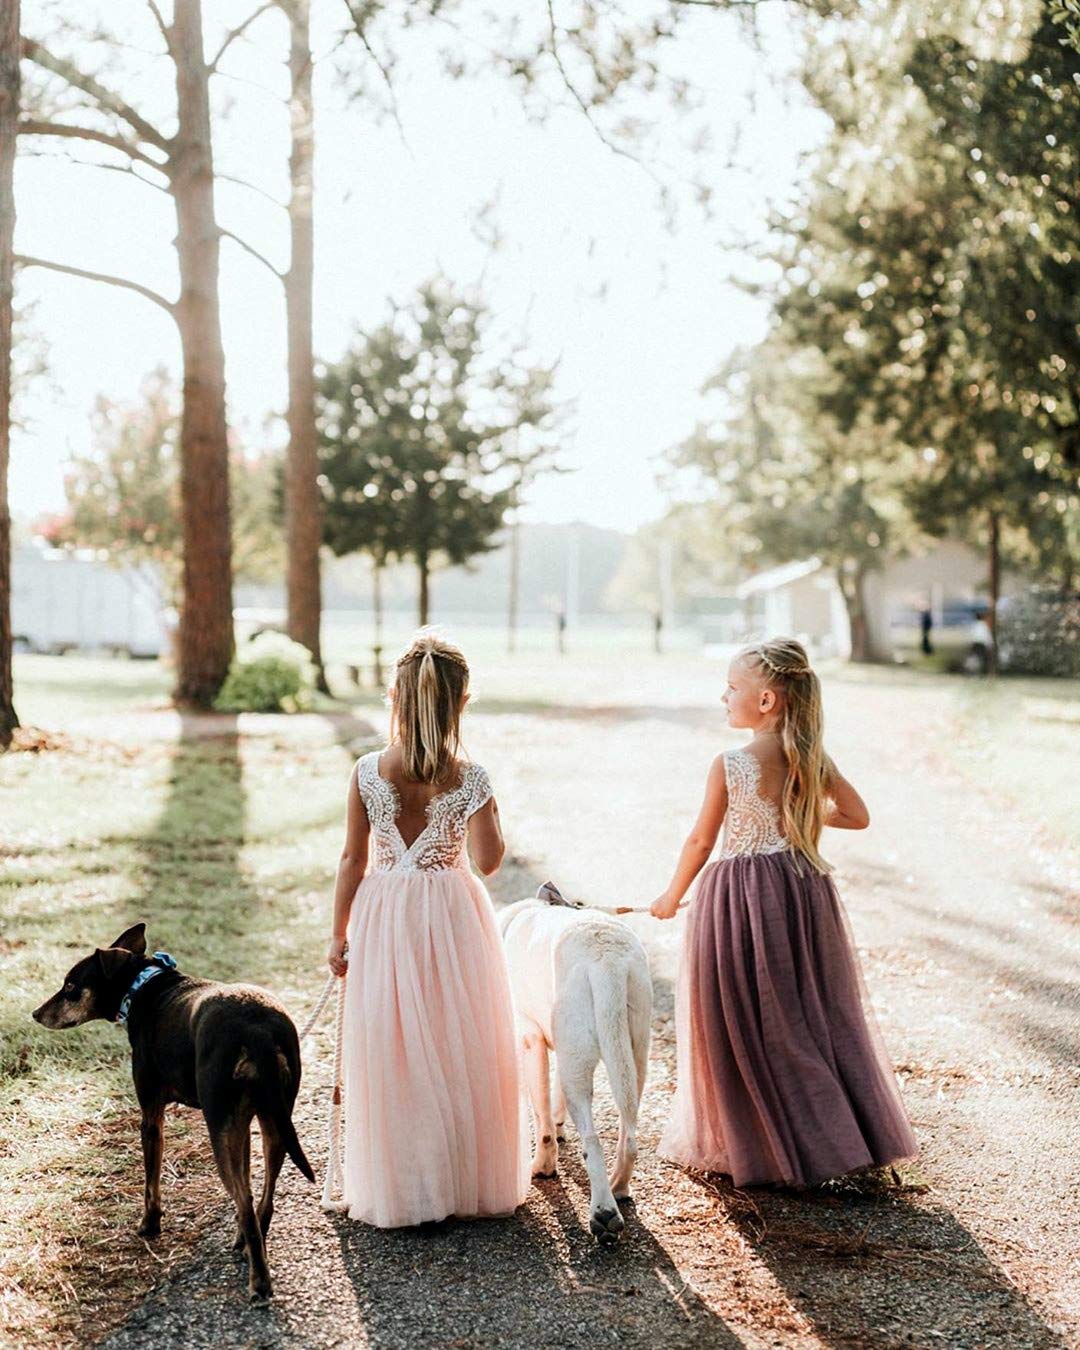 2Bunnies Flower Girl Dress Peony Lace Back A-Line Sleeveless Straight Tulle Maxi (Pink) - 2BUNNIES